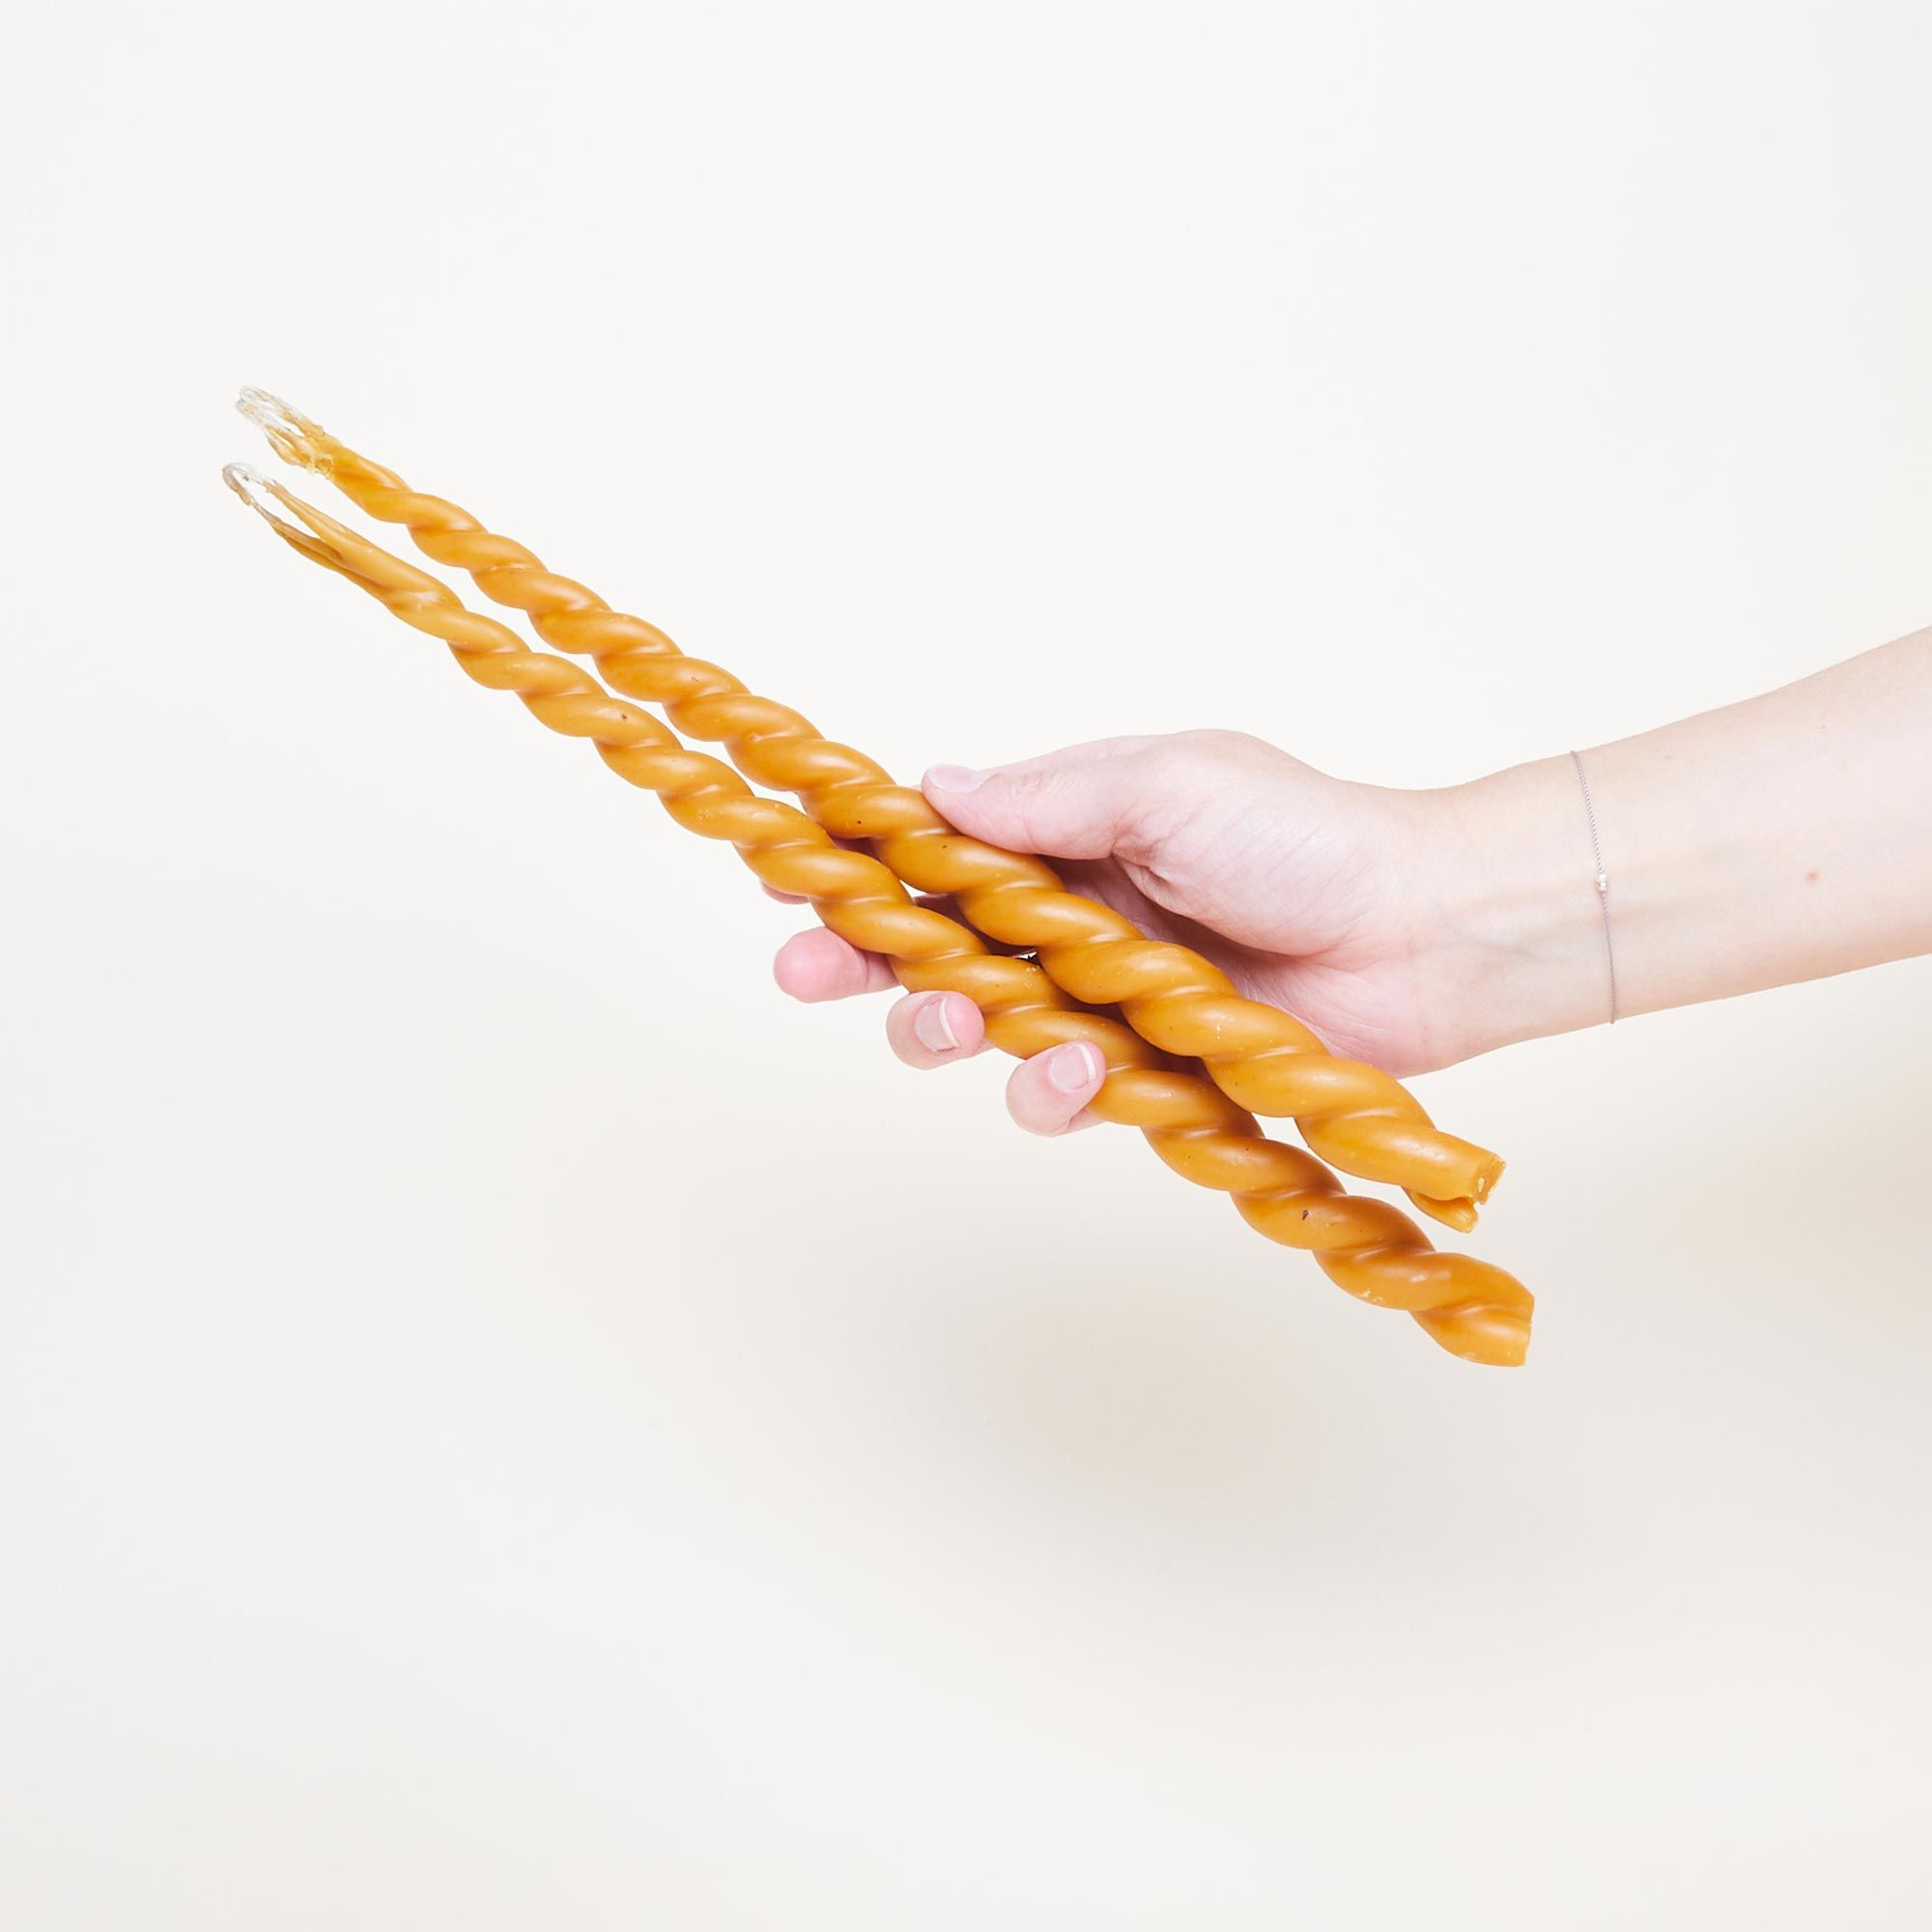 In a hand, two long golden yellow candles made from two pieces of wax that were twisted around each other